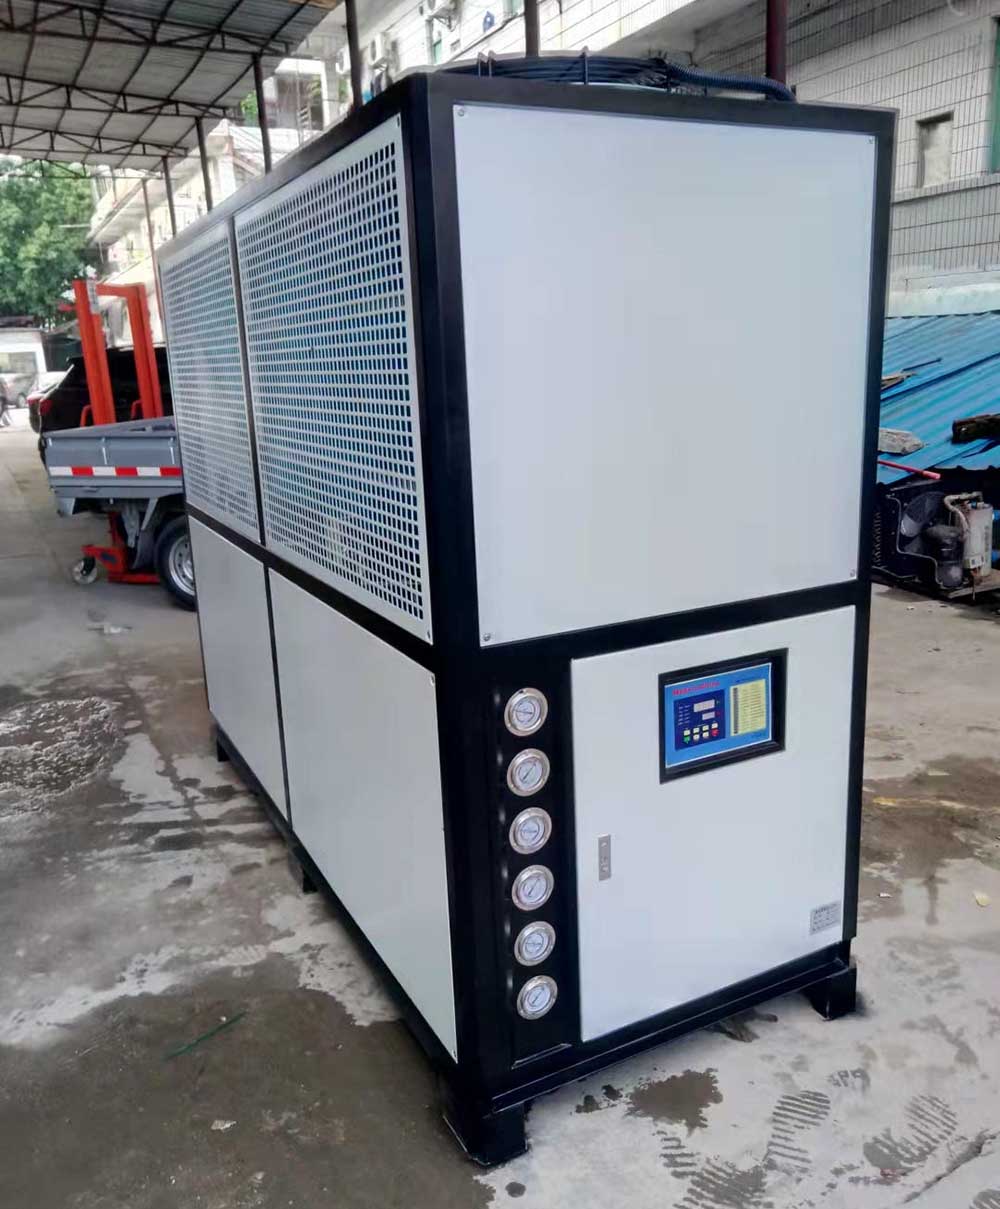 30HP air cooled chiller delivered on time